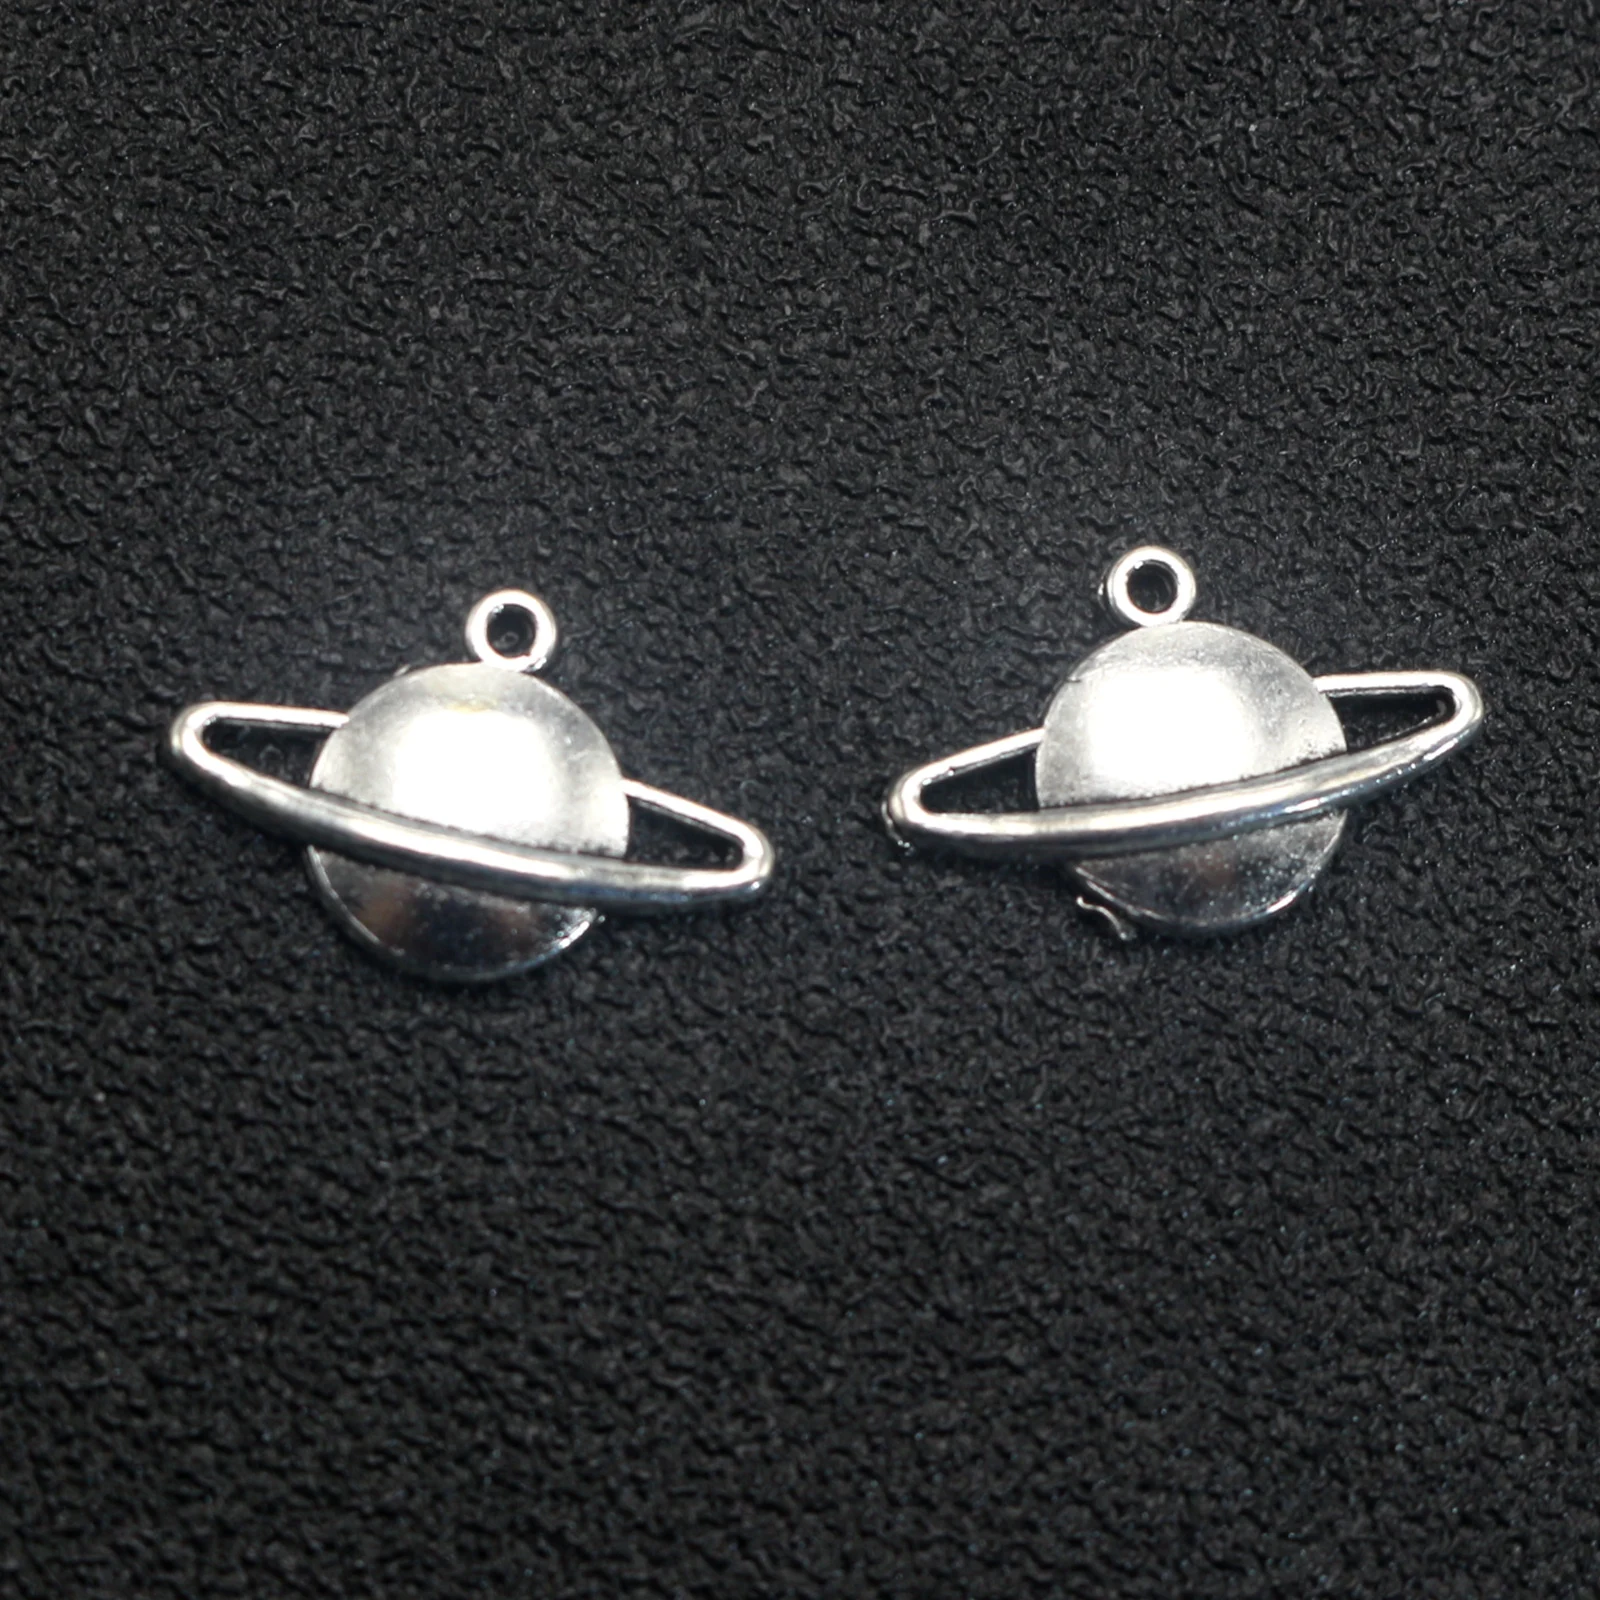 50 Tibet Alloy Planet Saturn Cosmos Space Charms Pendant 20mm DIY Earring